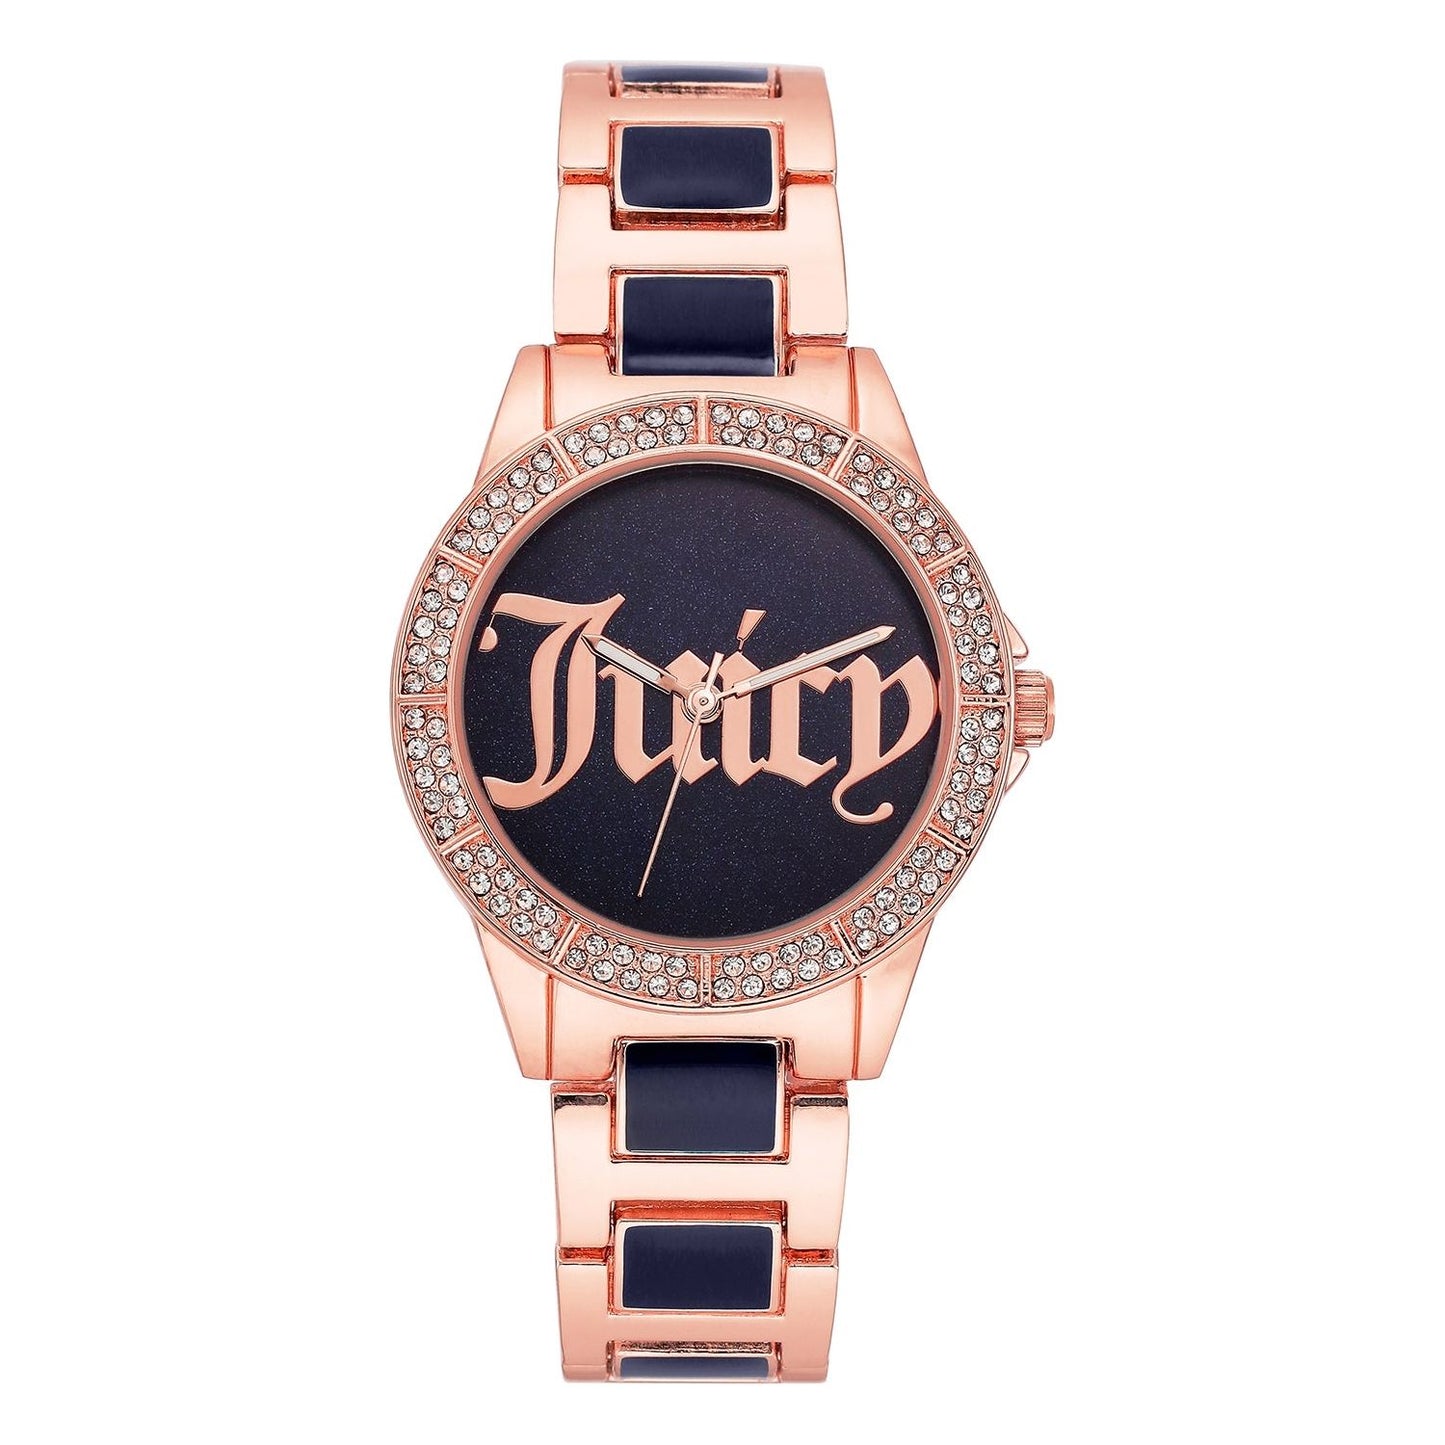 JUICY COUTURE JUICY COUTURE MOD. JC_1308NVRG WATCHES juicy-couture-mod-jc_1308nvrg